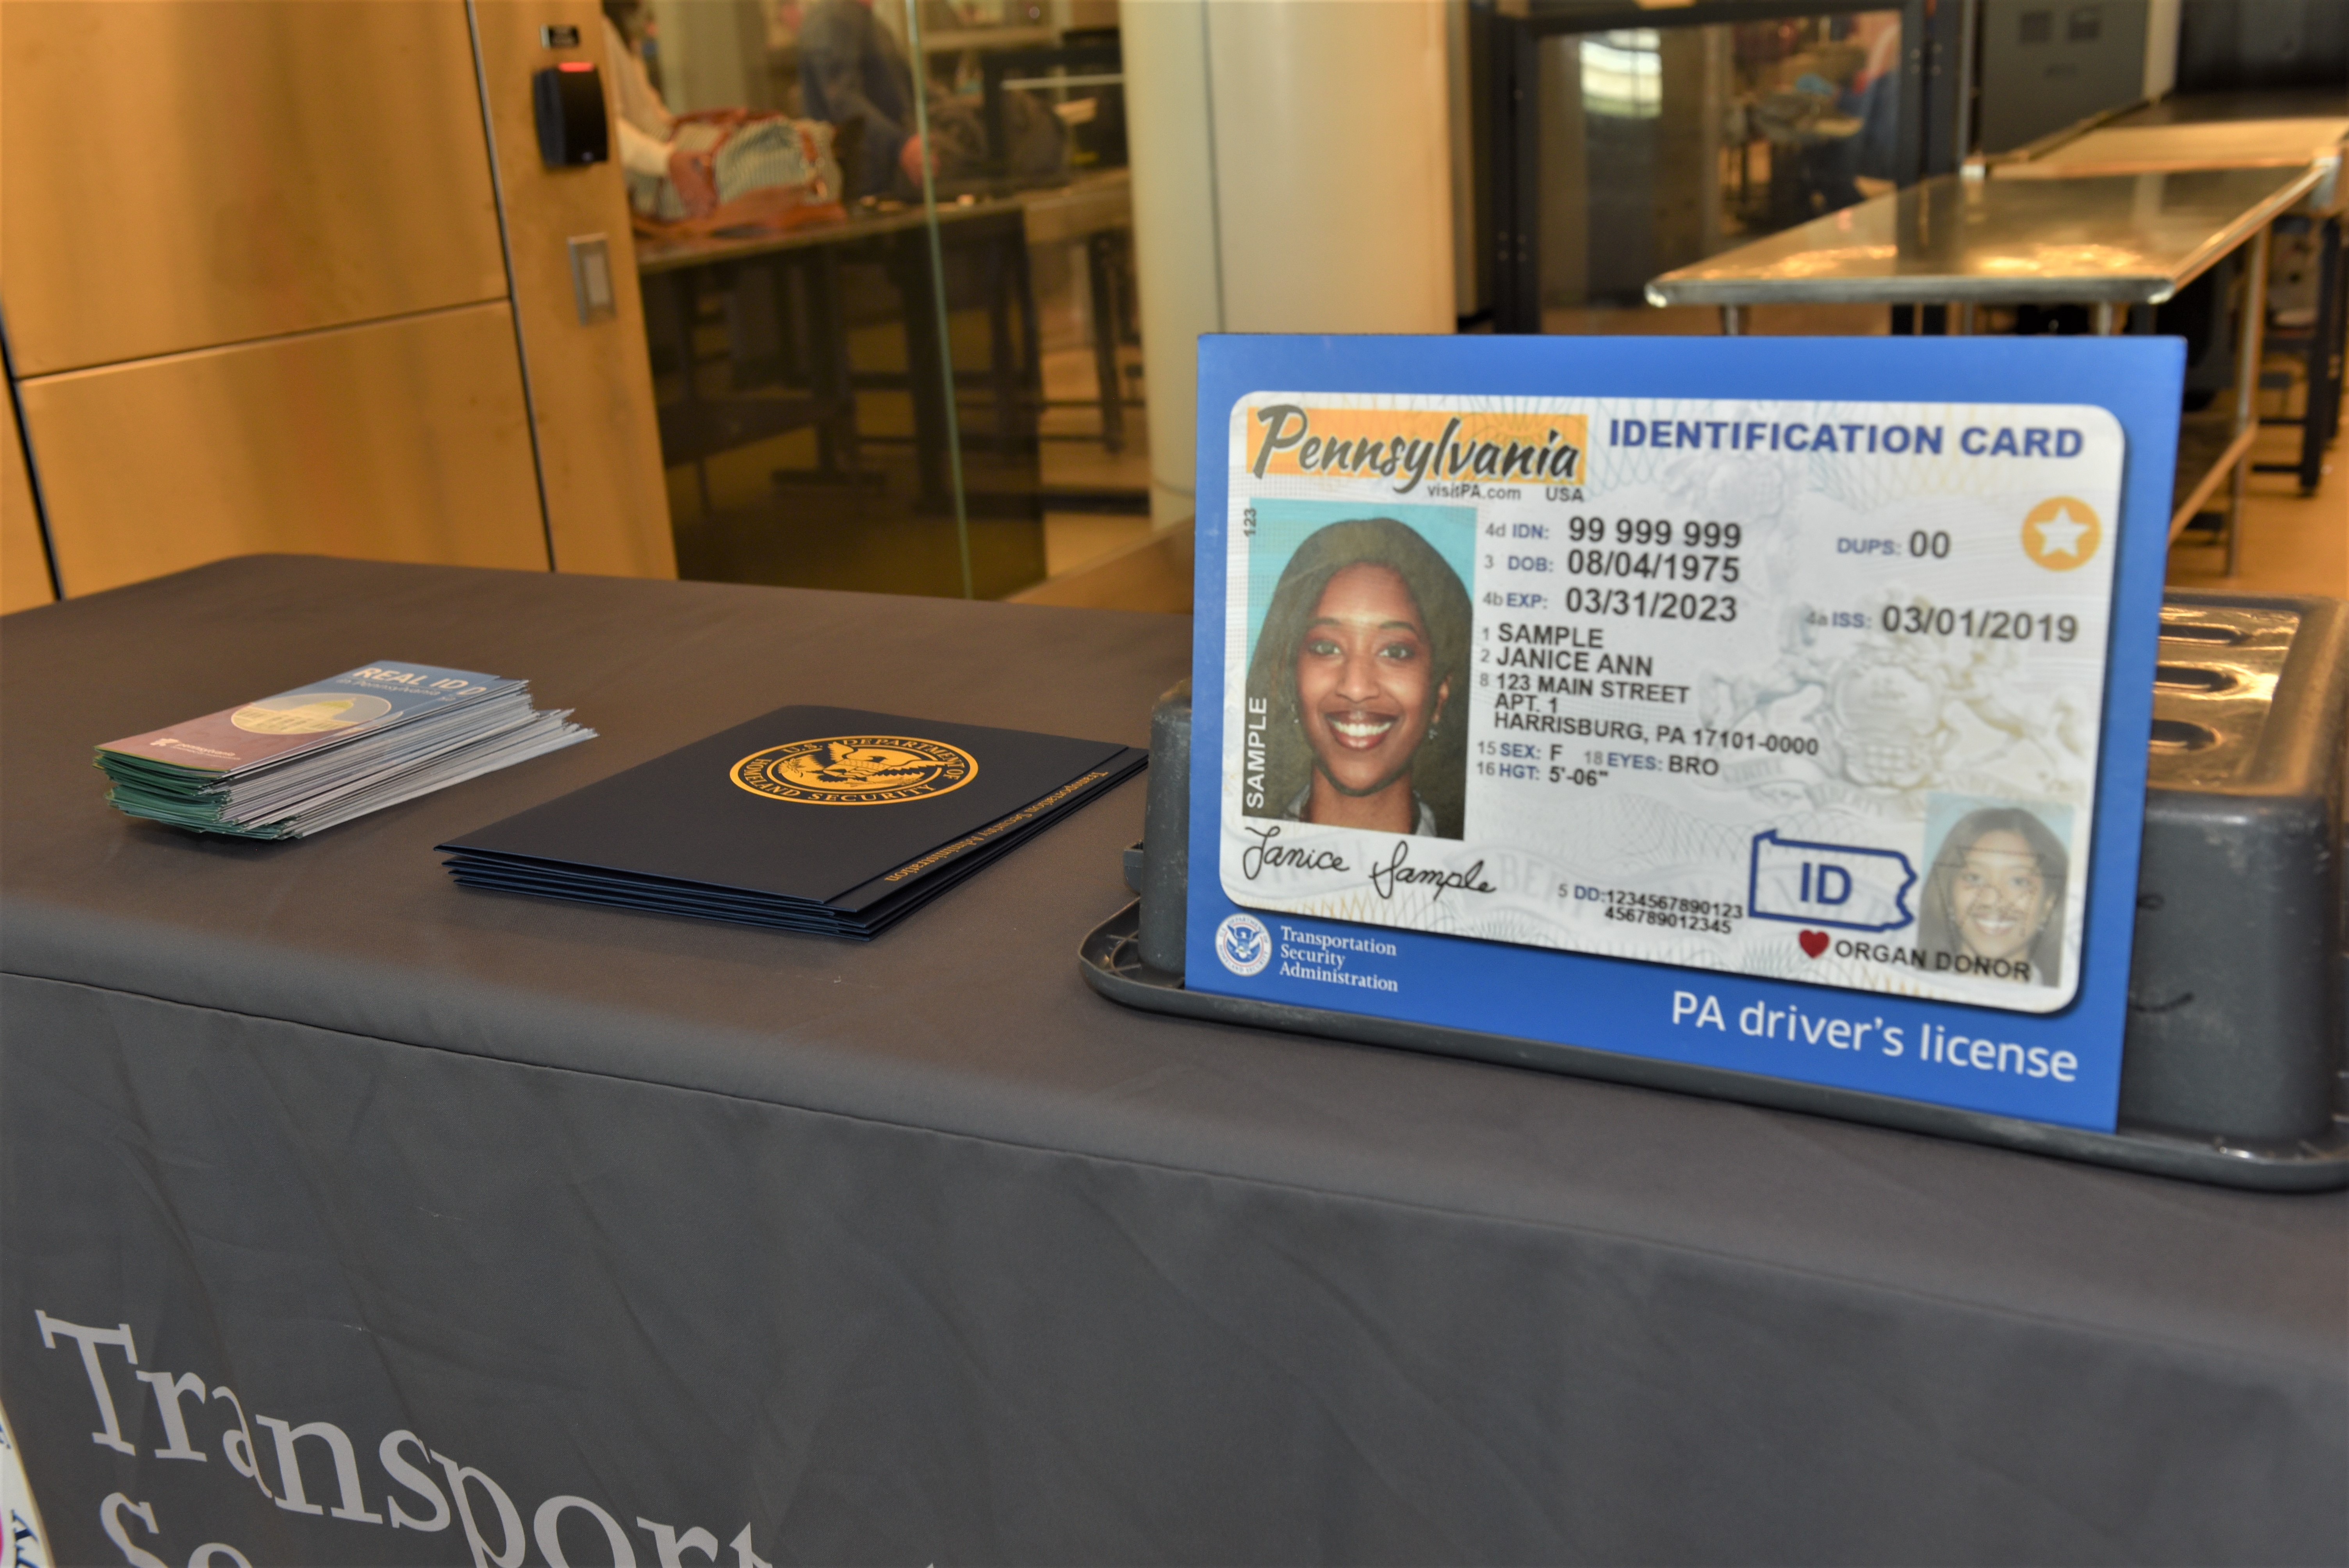 Real ID compliant driver’s licenses are marked with a star at the top of the card